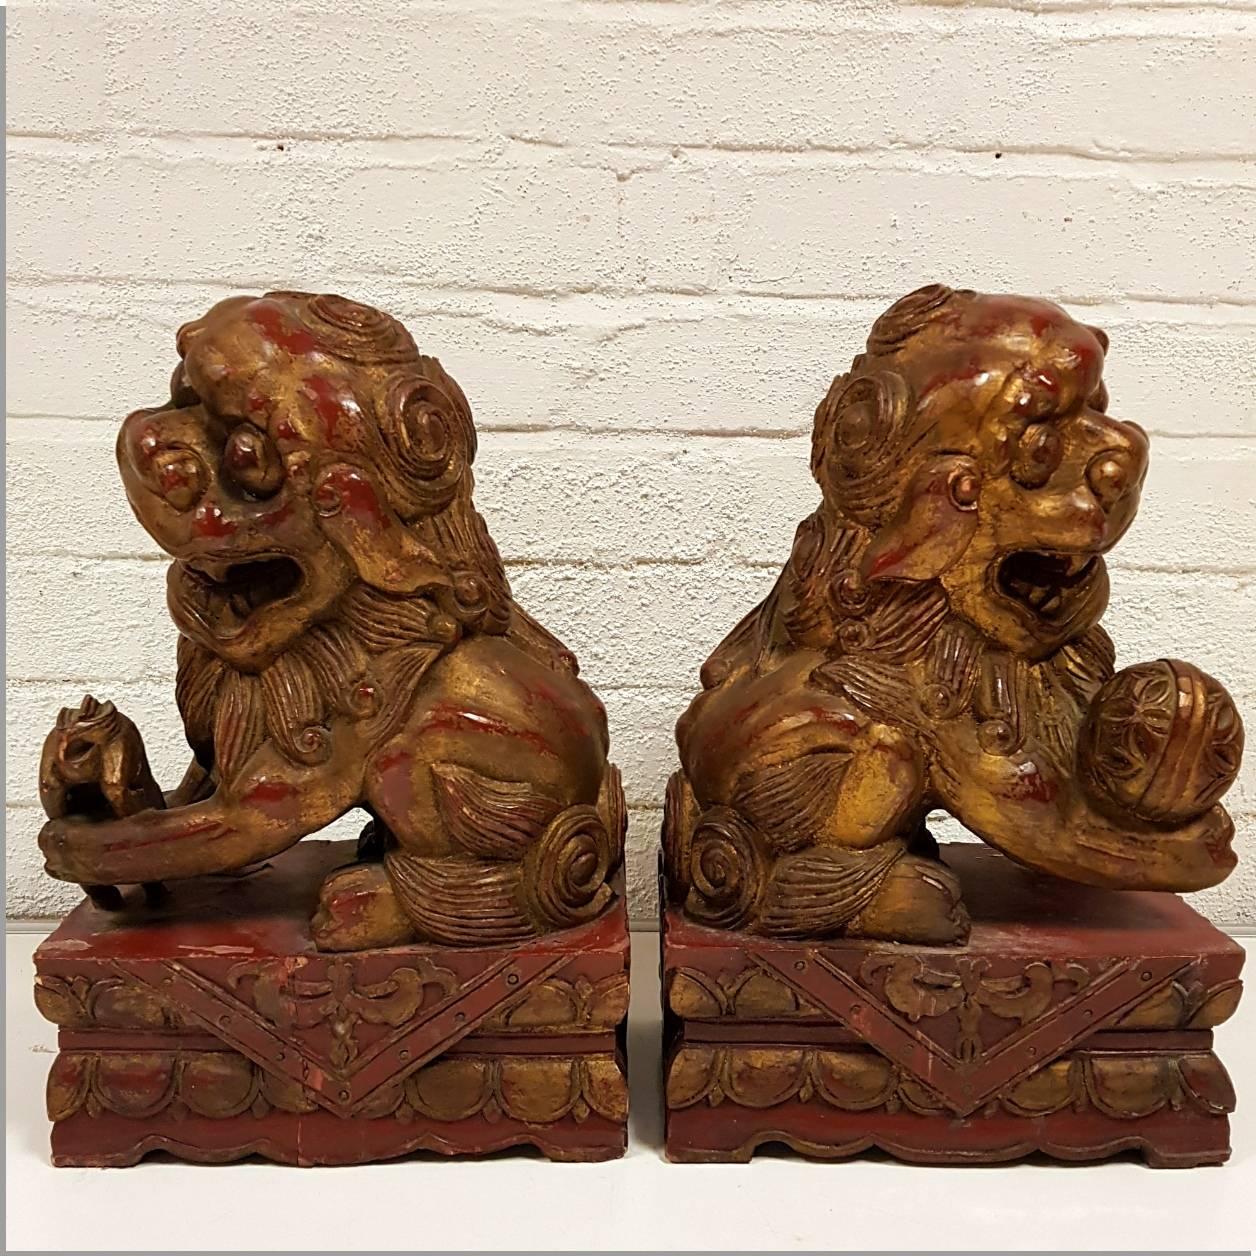 Pair of large late 19th century hand-carved wooden Chinese foo dog figures. Remnants of red lacquer and gilt decoration still visible. Matching pair with the female (with cub) and male (with ball). According to the teachings of Feng Shui, there is a